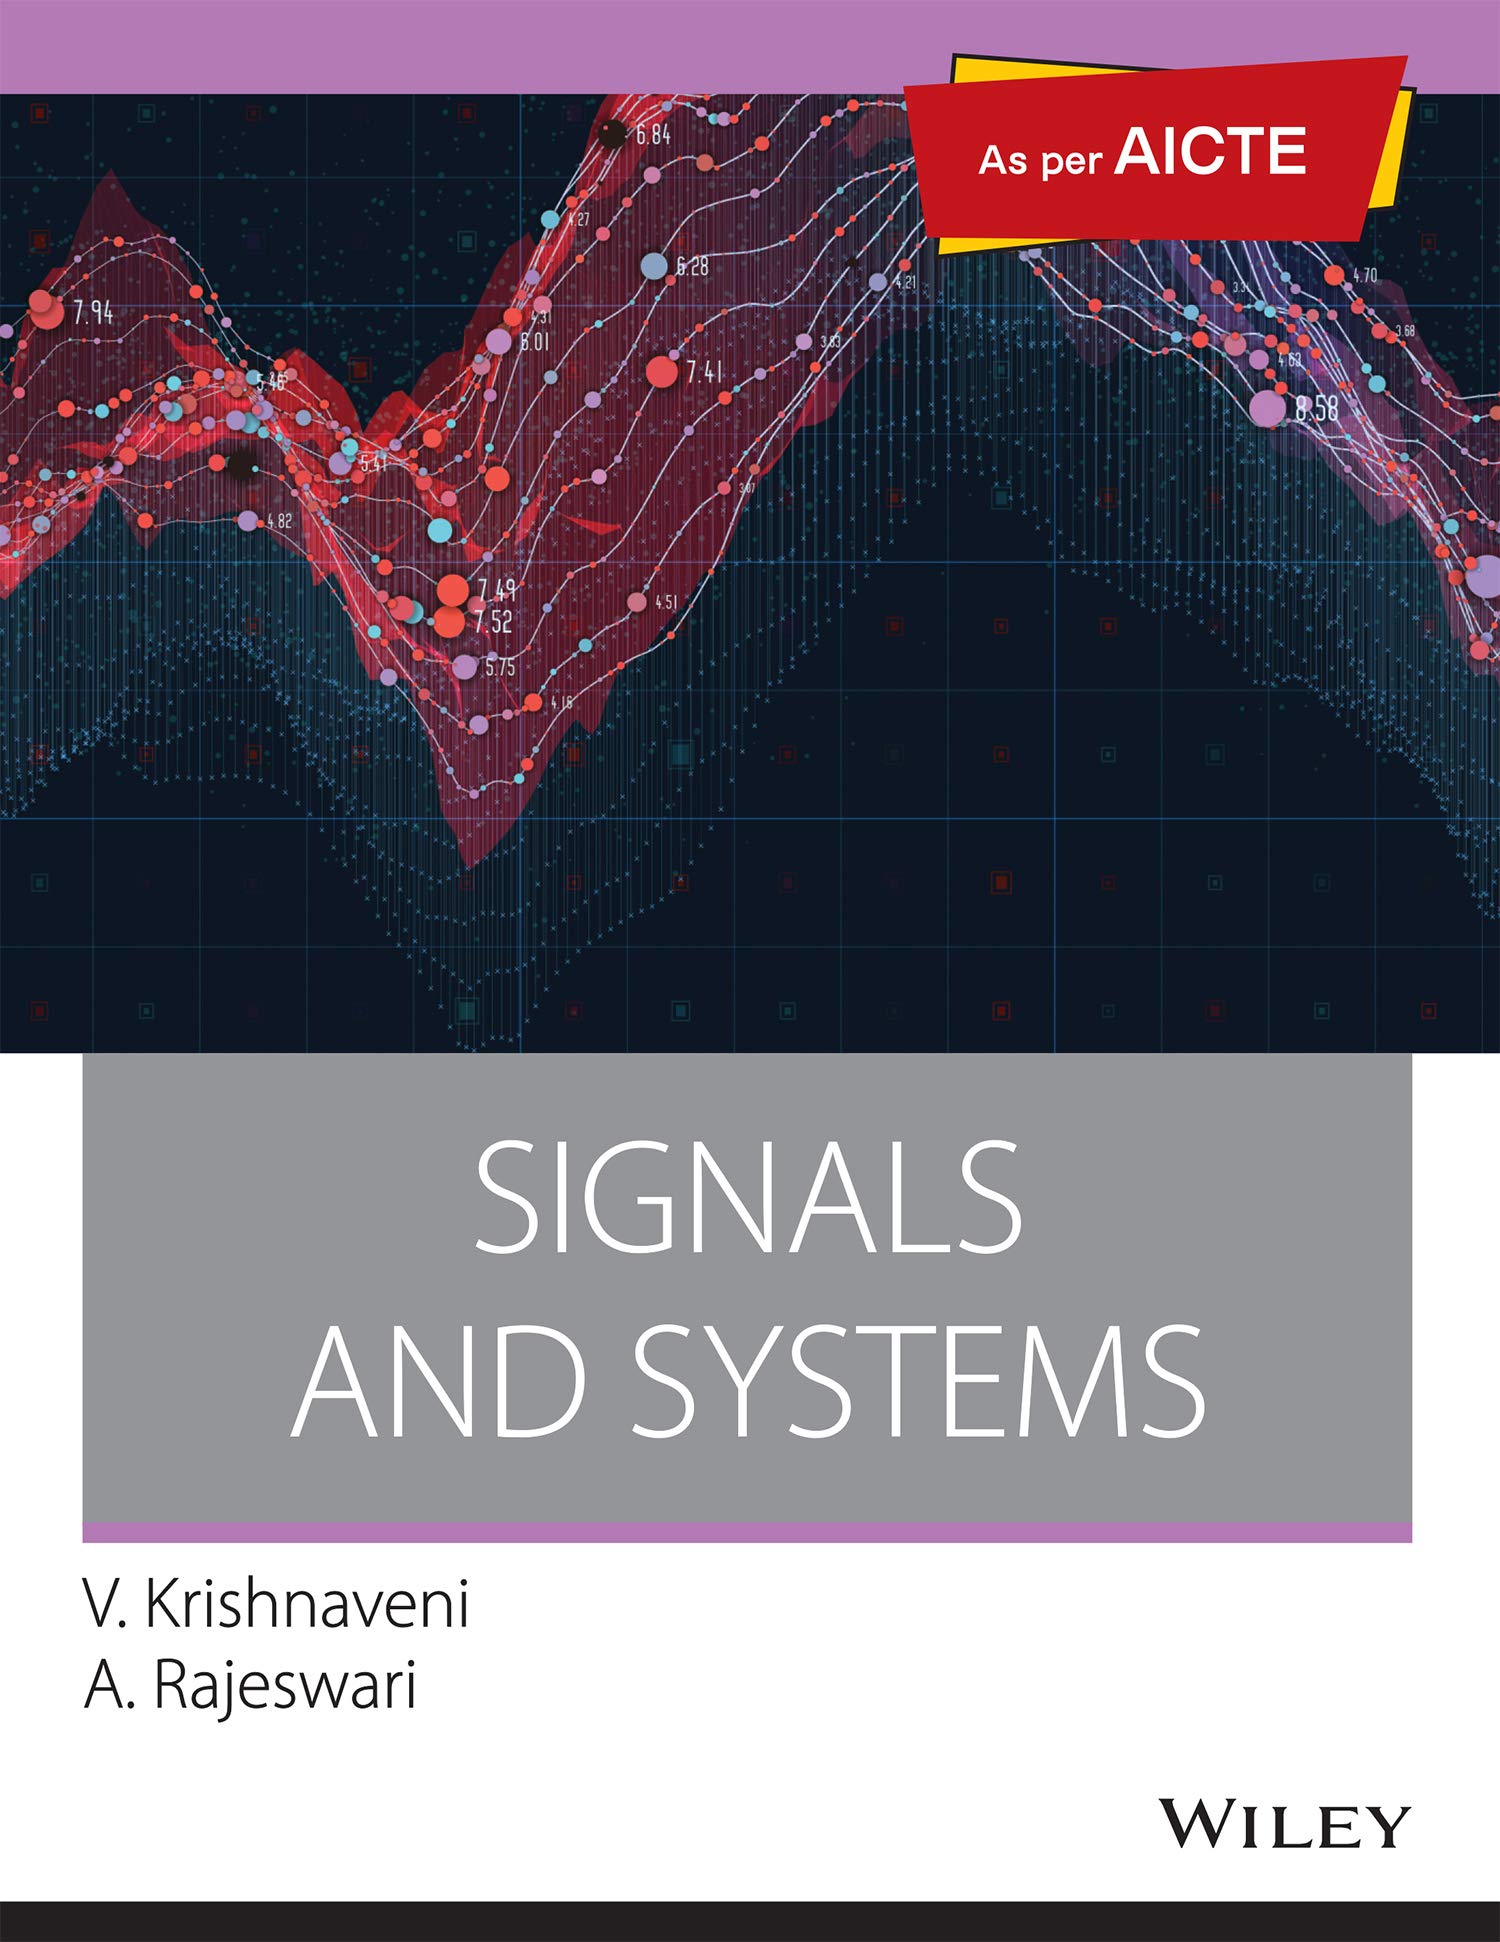 [PDF] Download Signals and Systems by V. Krishnaveni Book pdf